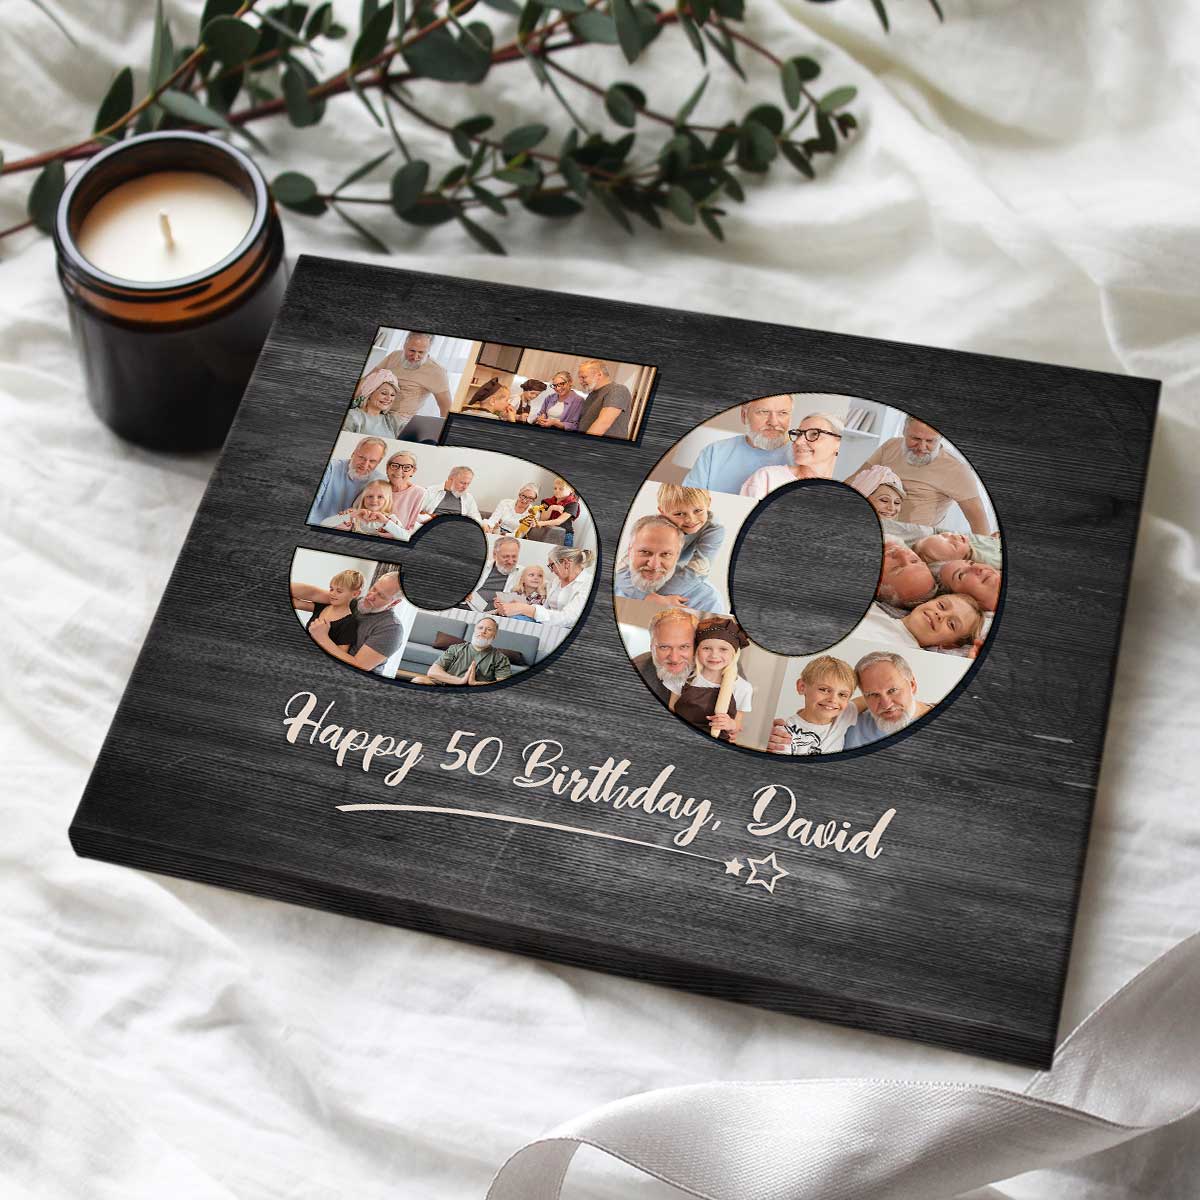 50th Birthday Gift for Women, 50th Birthday Gift for Her, 50th Birthday Gifts for Her, Happy 50th Birthday, 50th Birthday, Personalized Gift